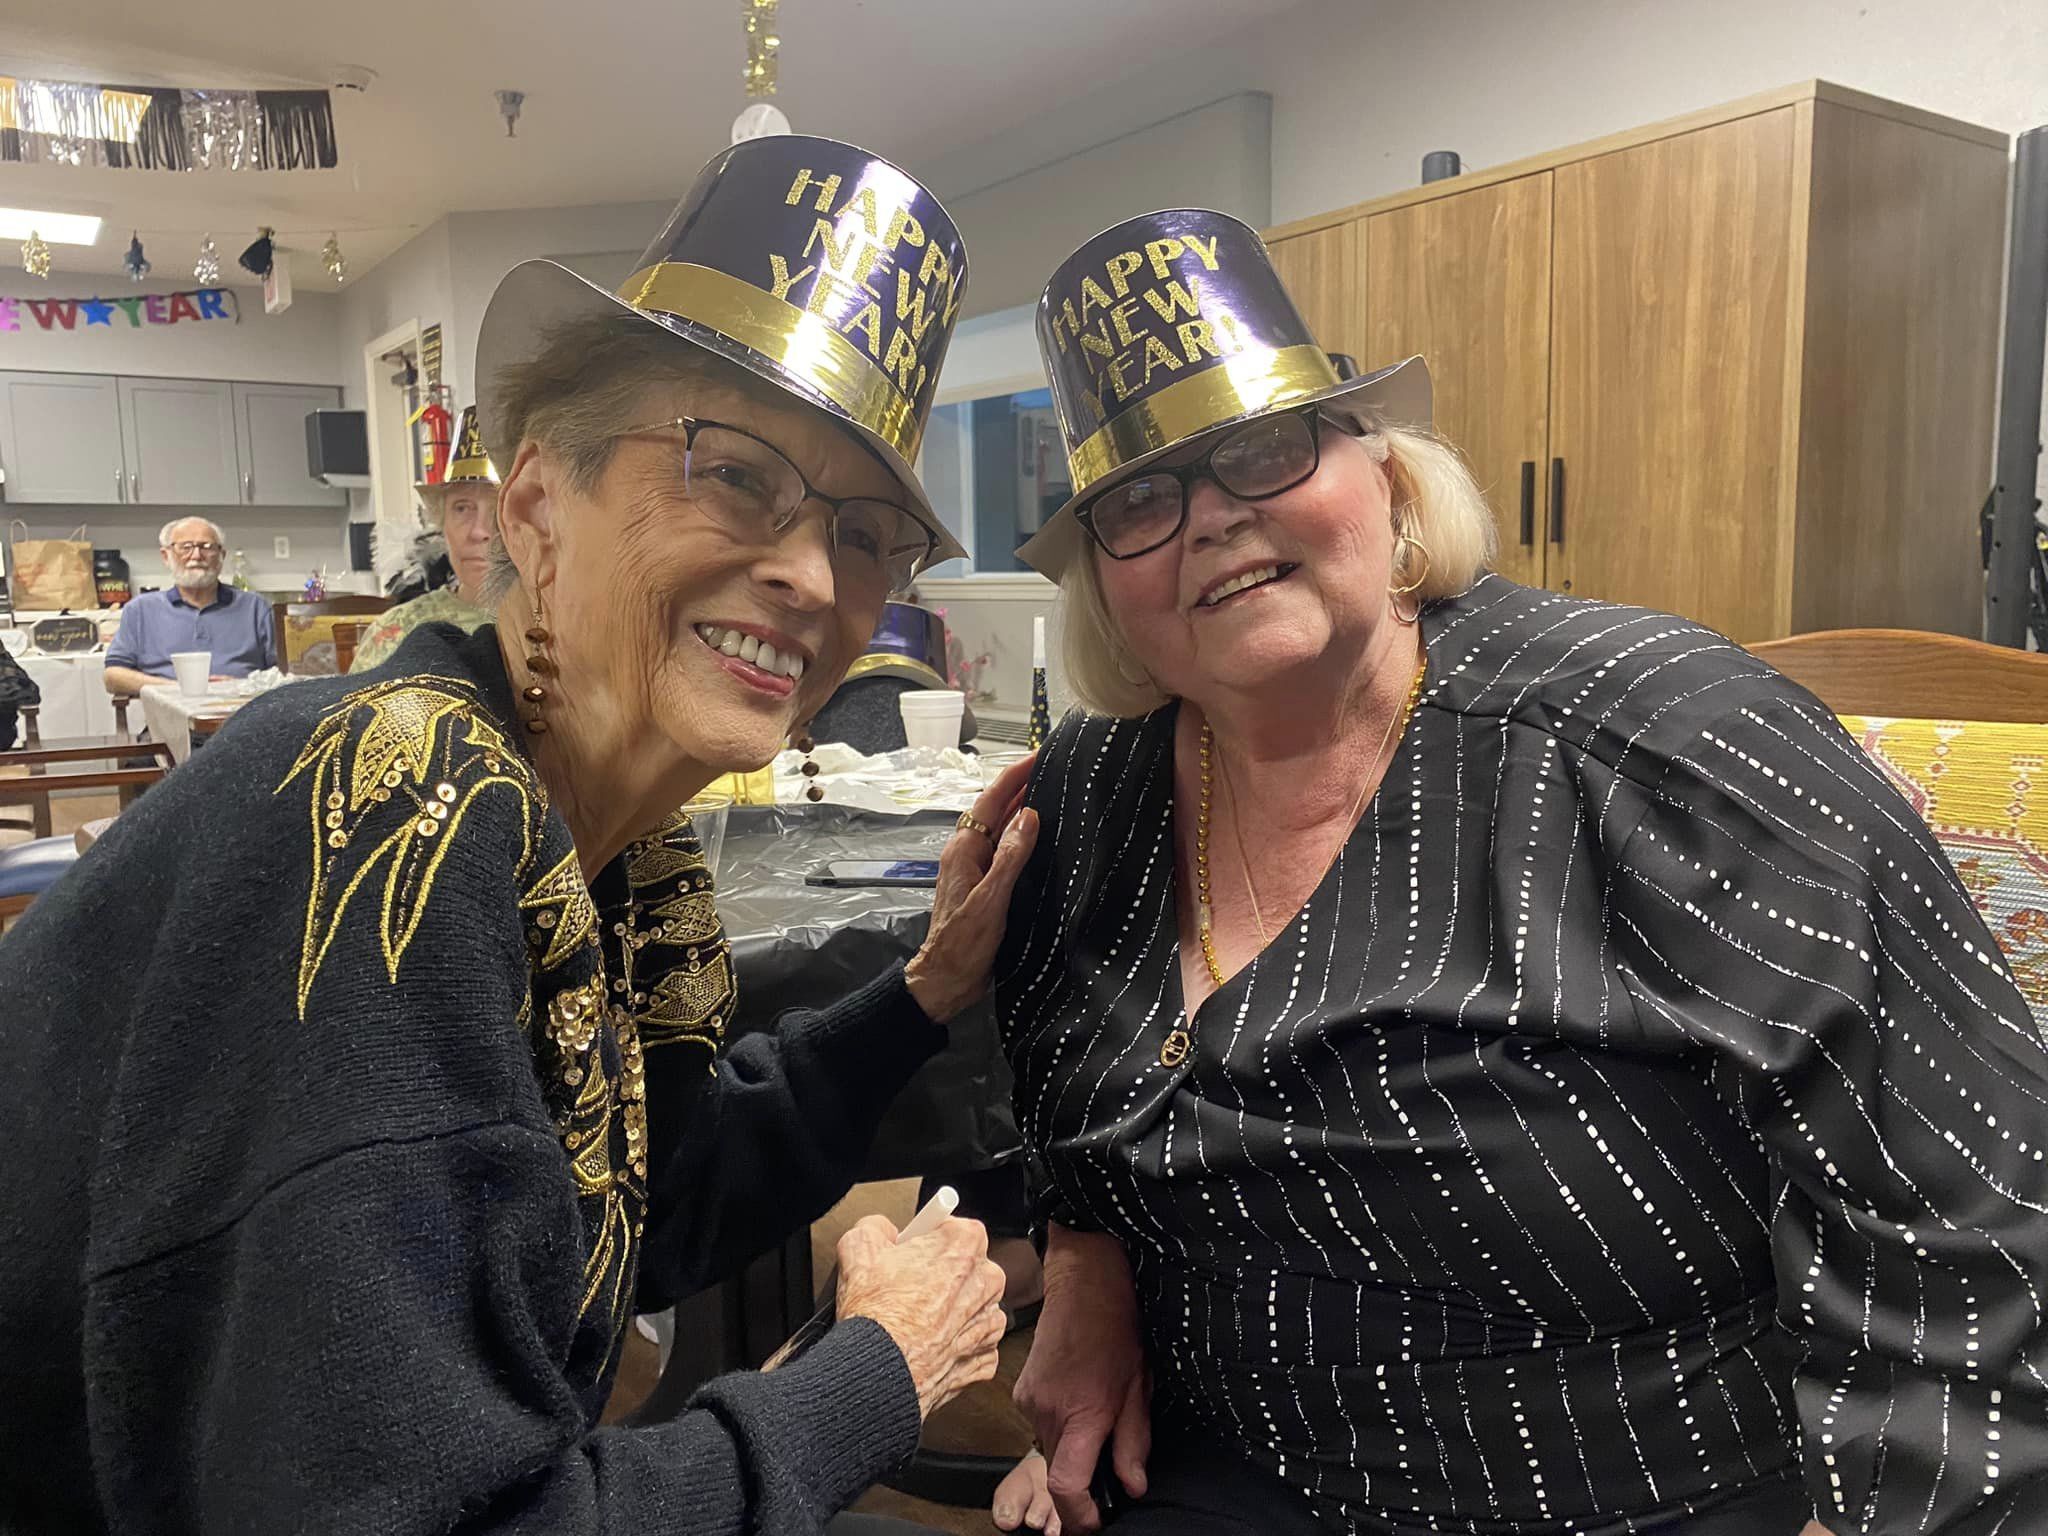 Residents celebrating the New Year